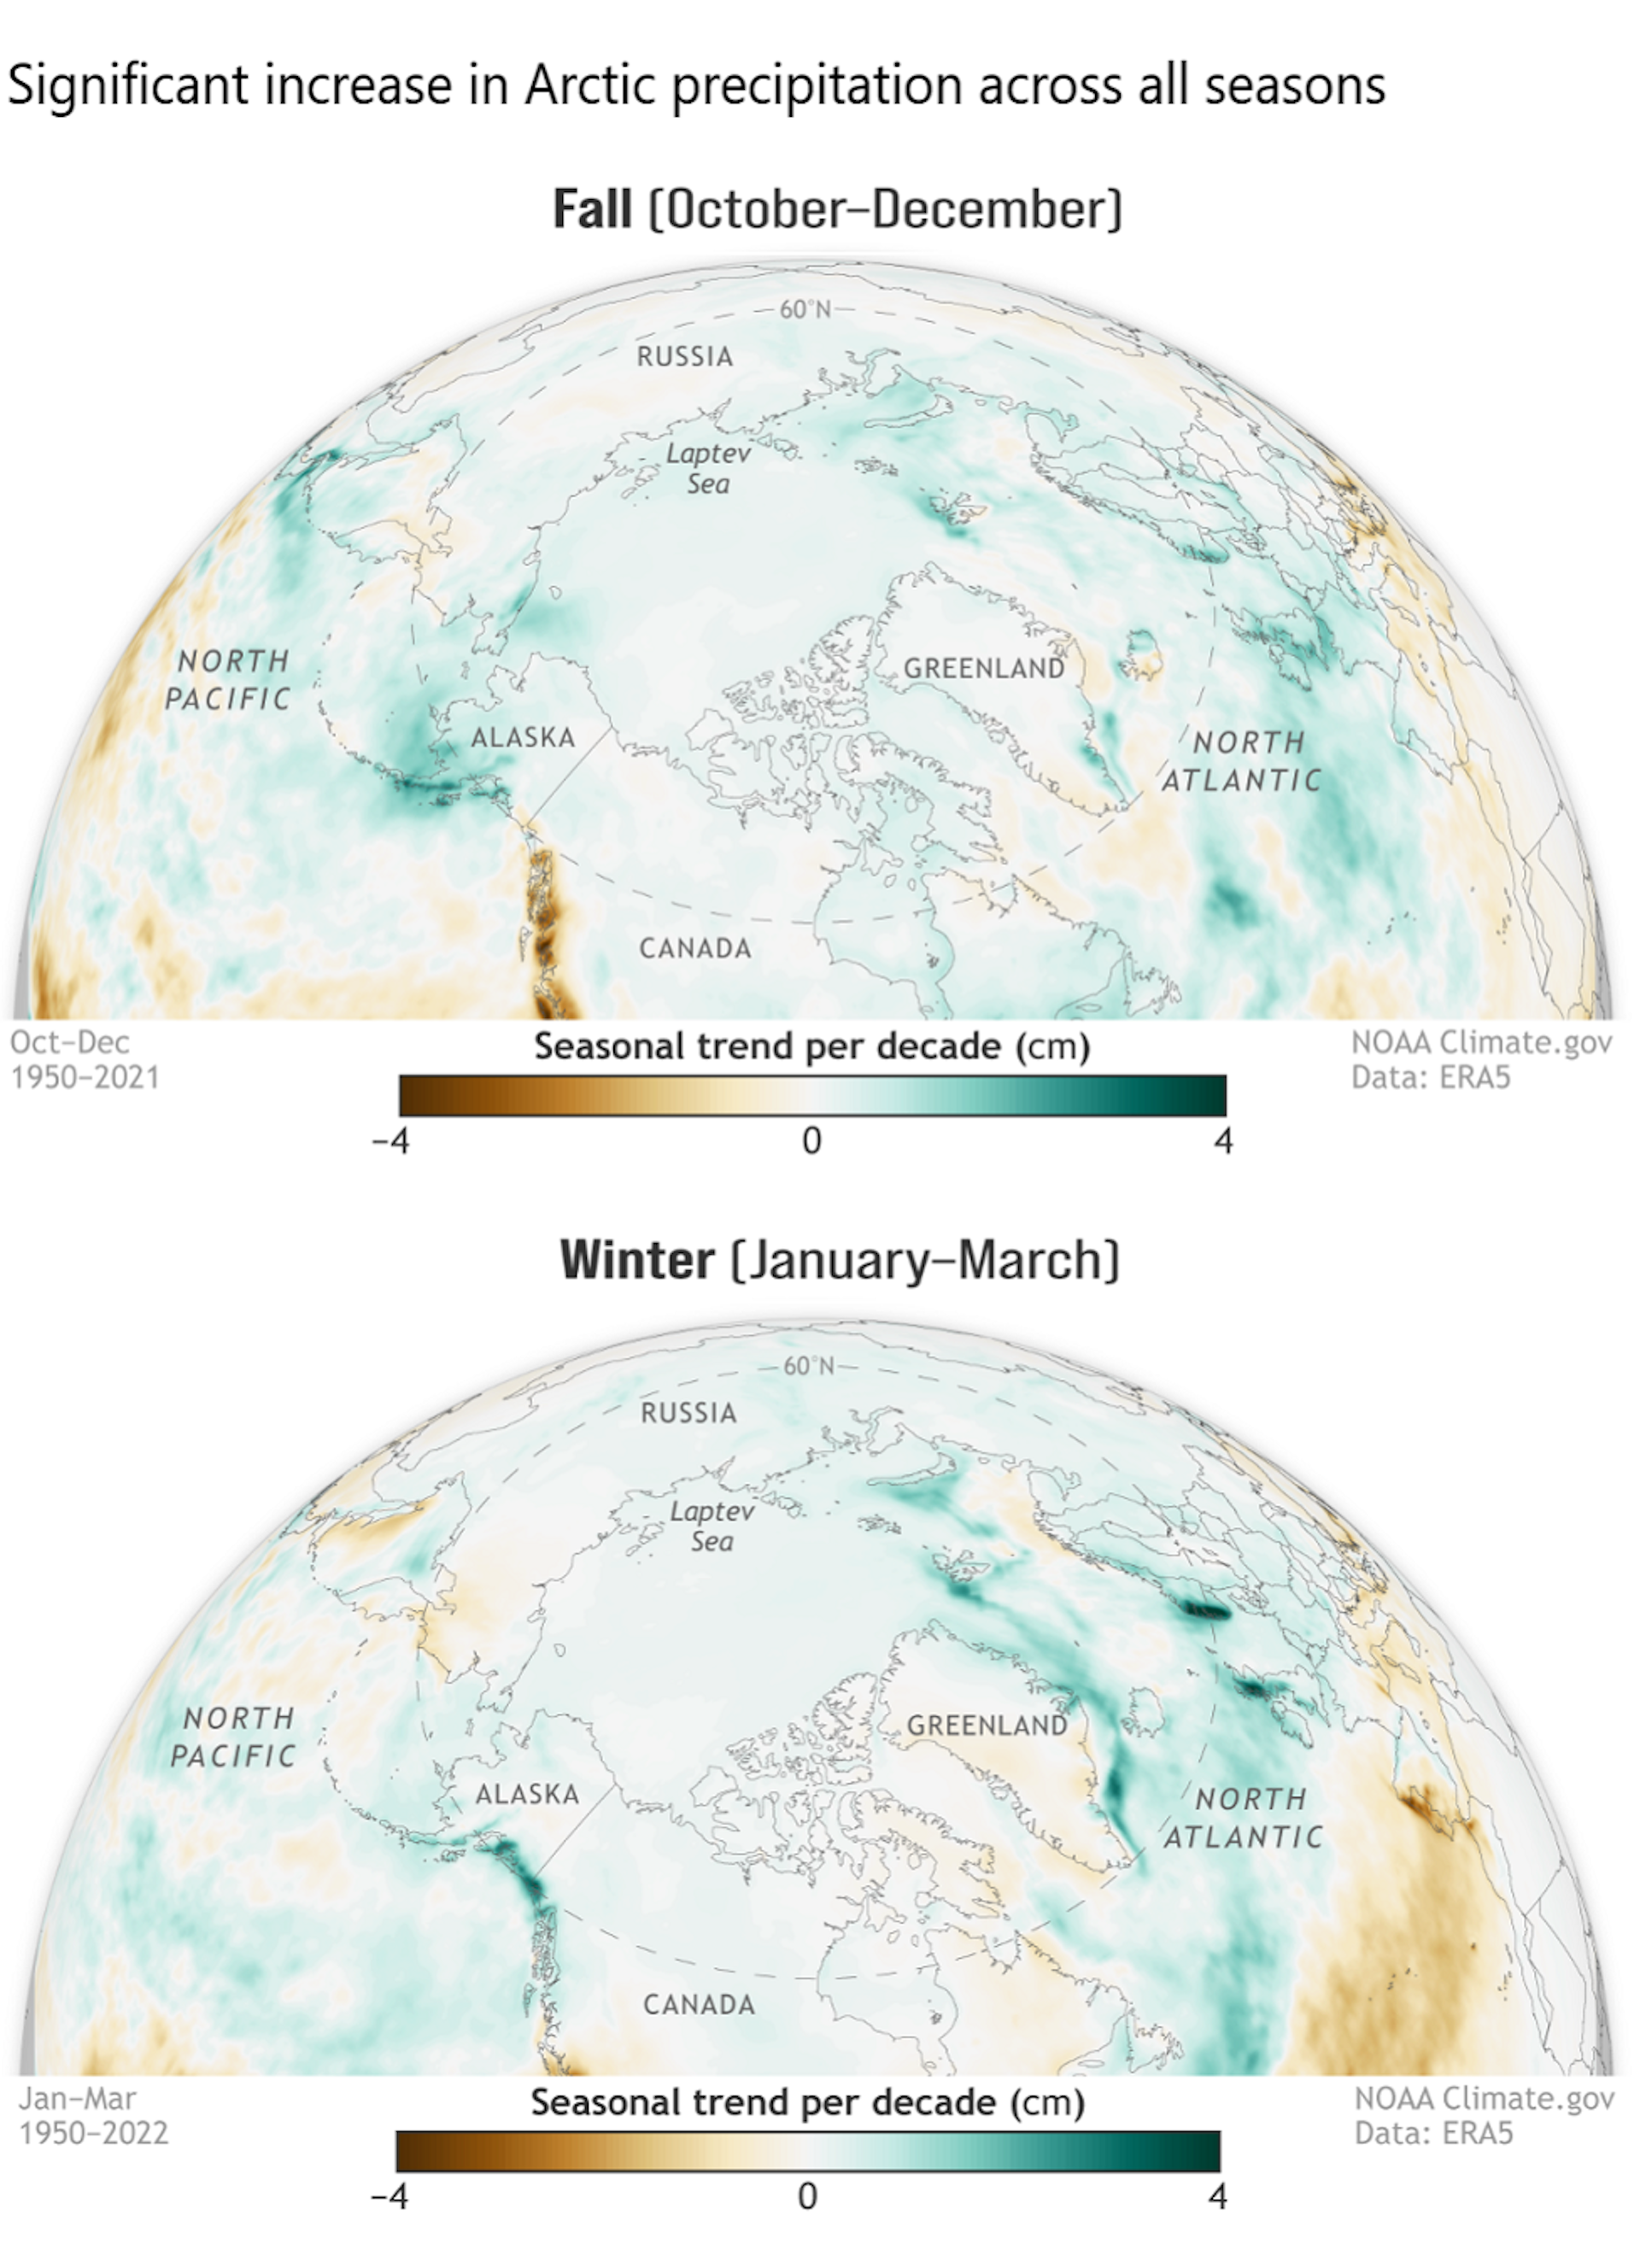 Map shows significant increases in precipitation across the Arctic in both winter and fall.